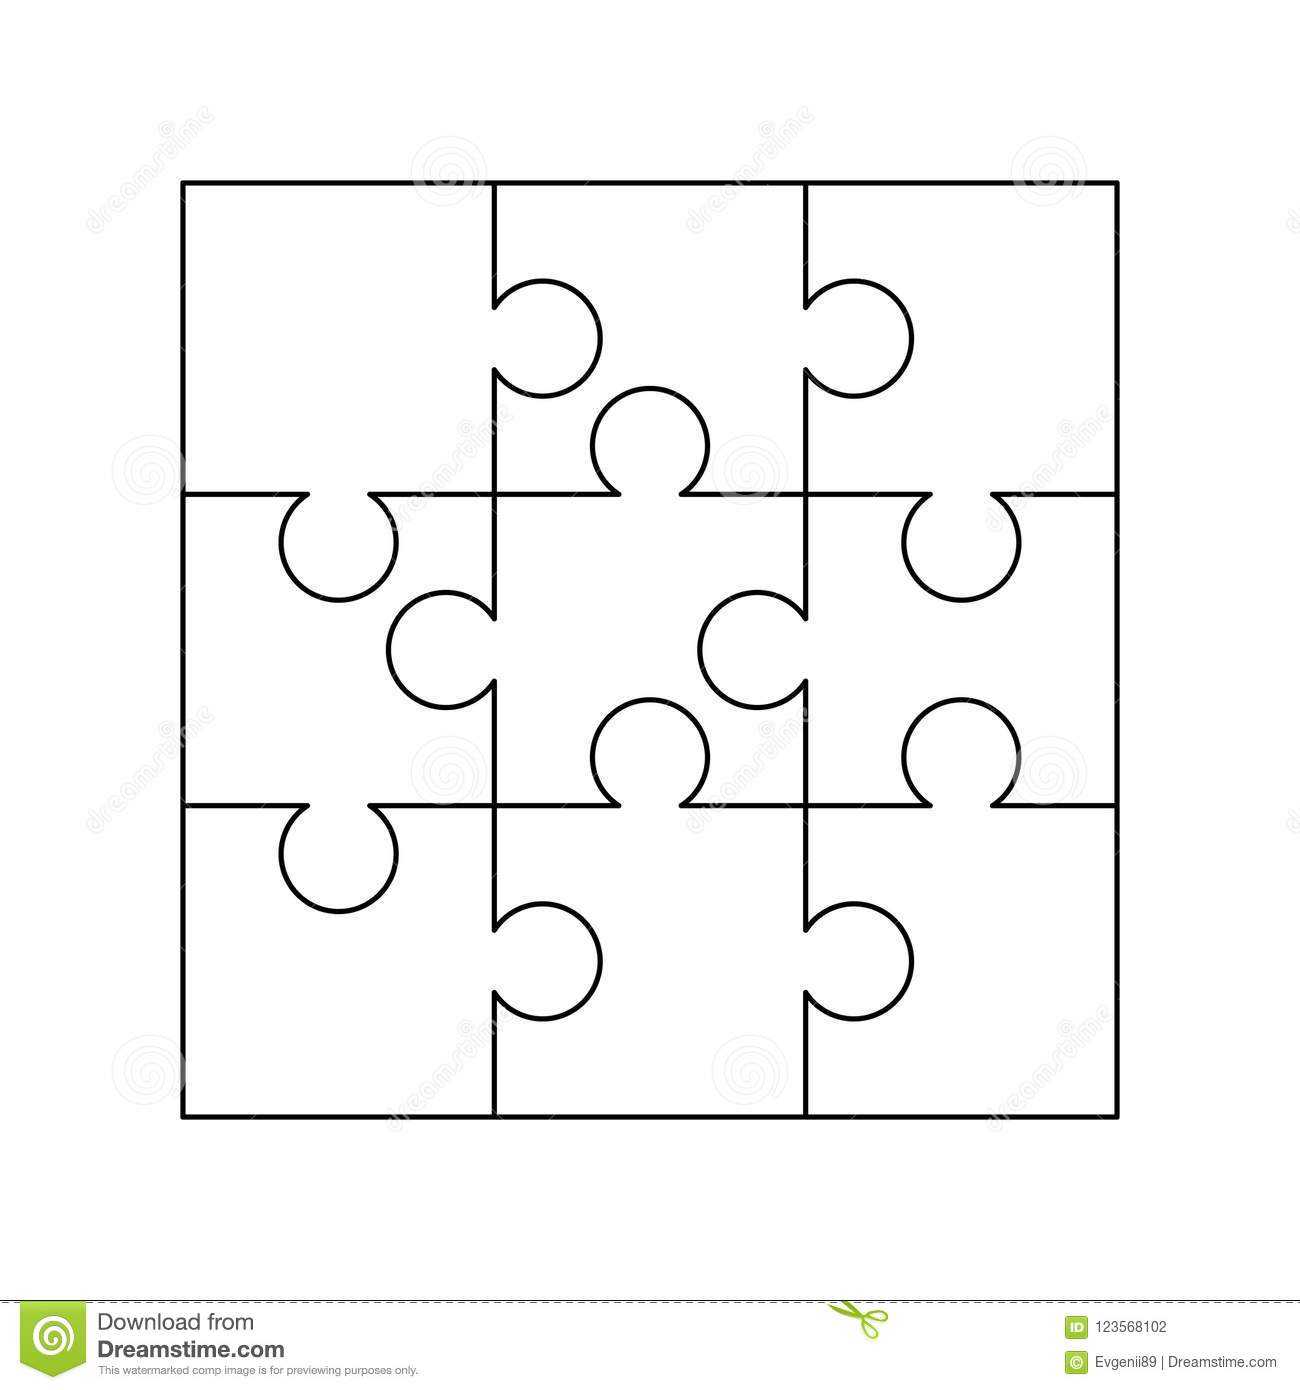 9 White Puzzles Pieces Arranged In A Square. Jigsaw Puzzle Regarding Jigsaw Puzzle Template For Word